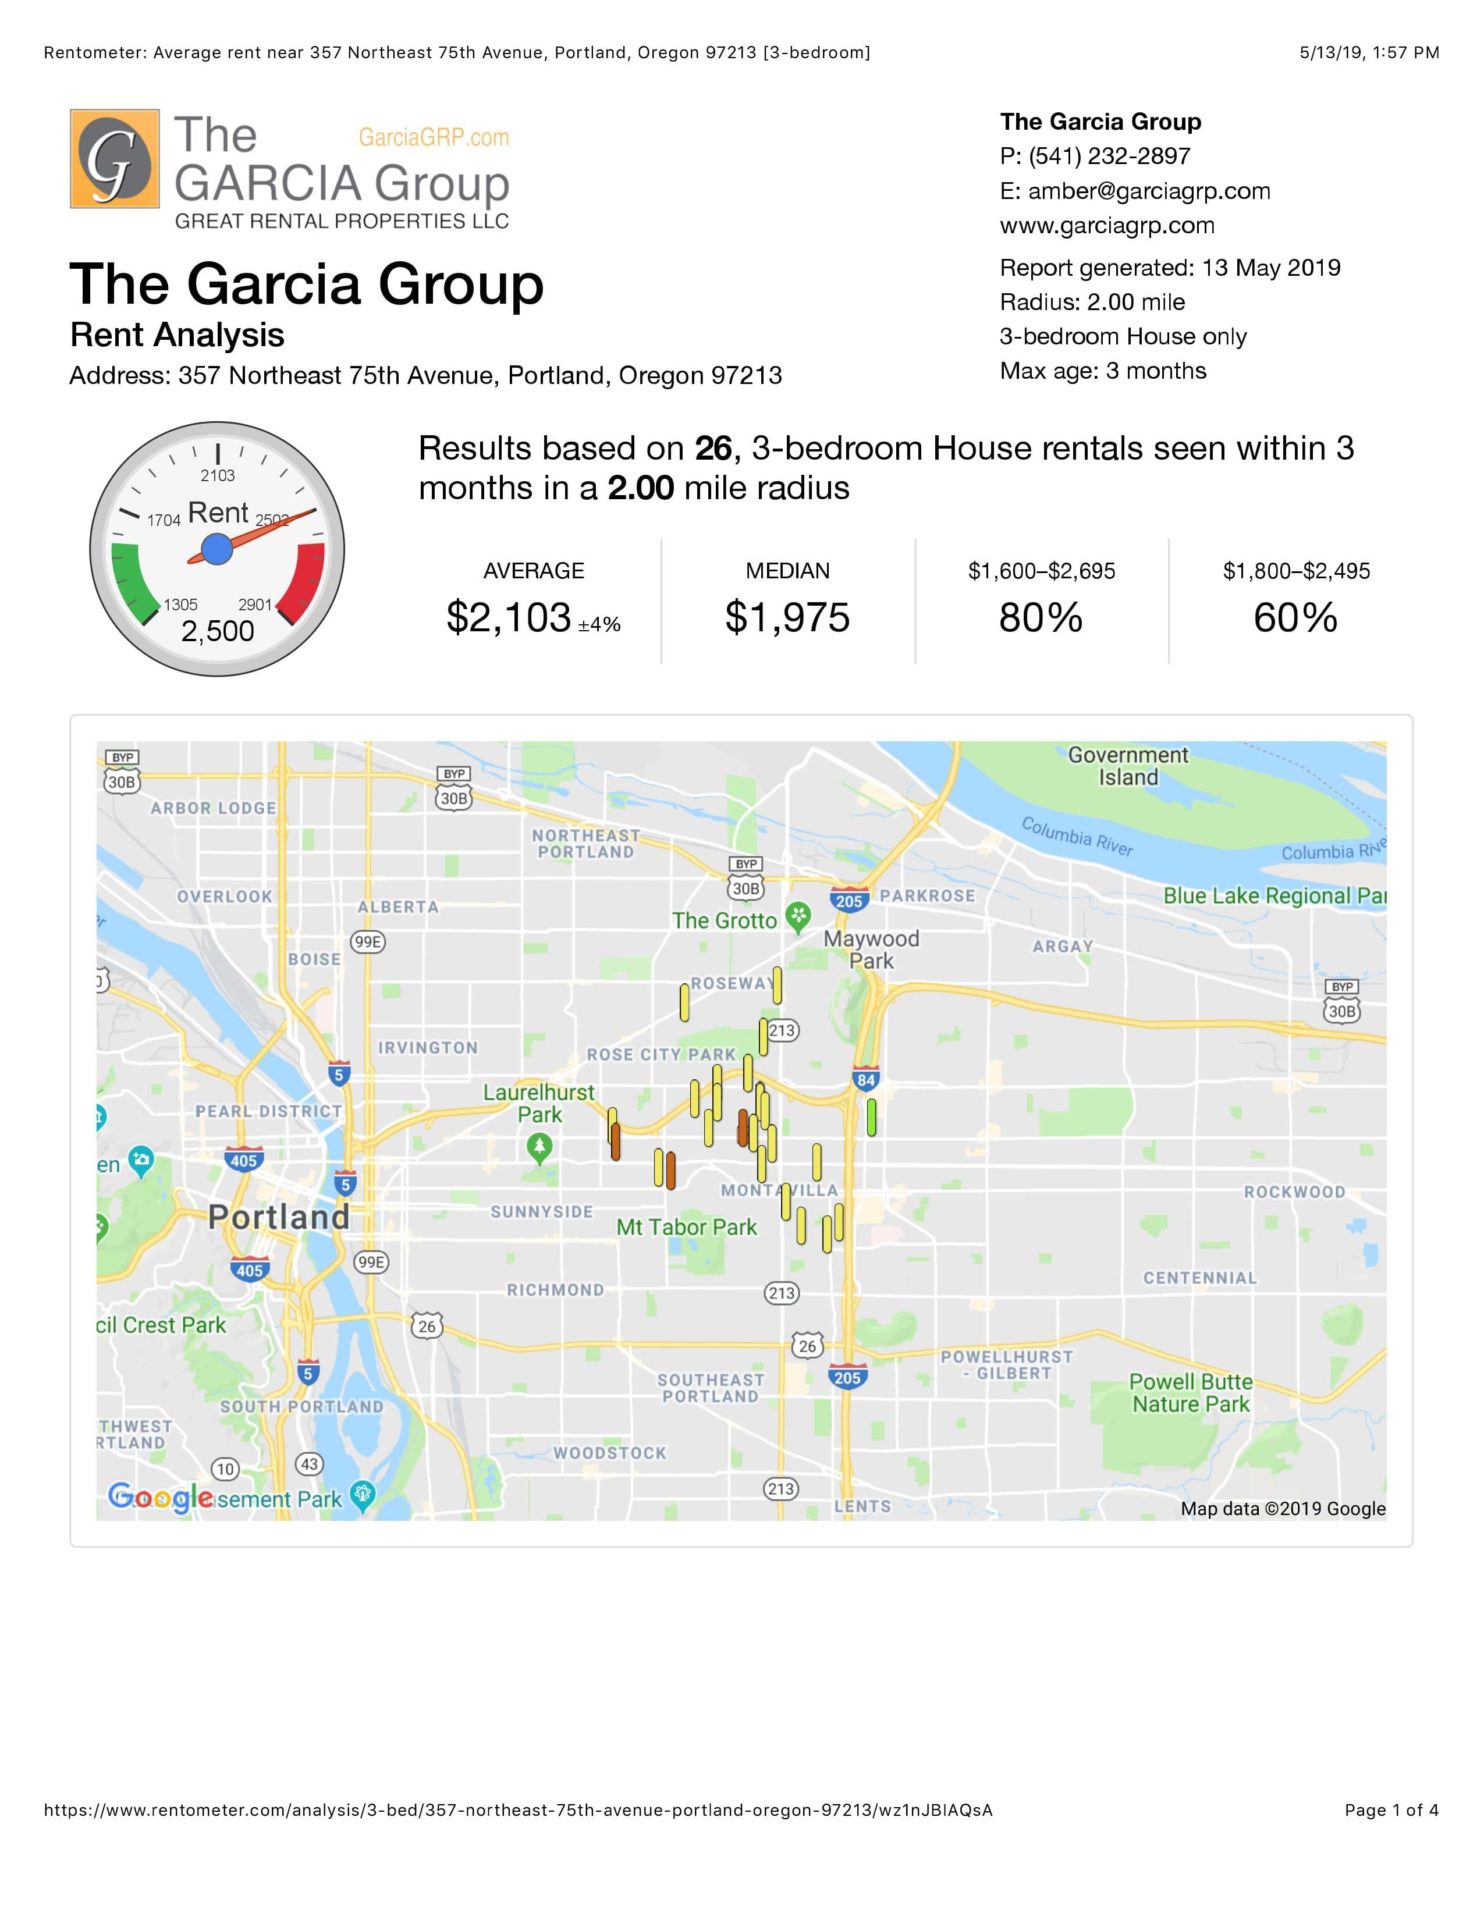 An image of The Garcia Group Rent Analysis